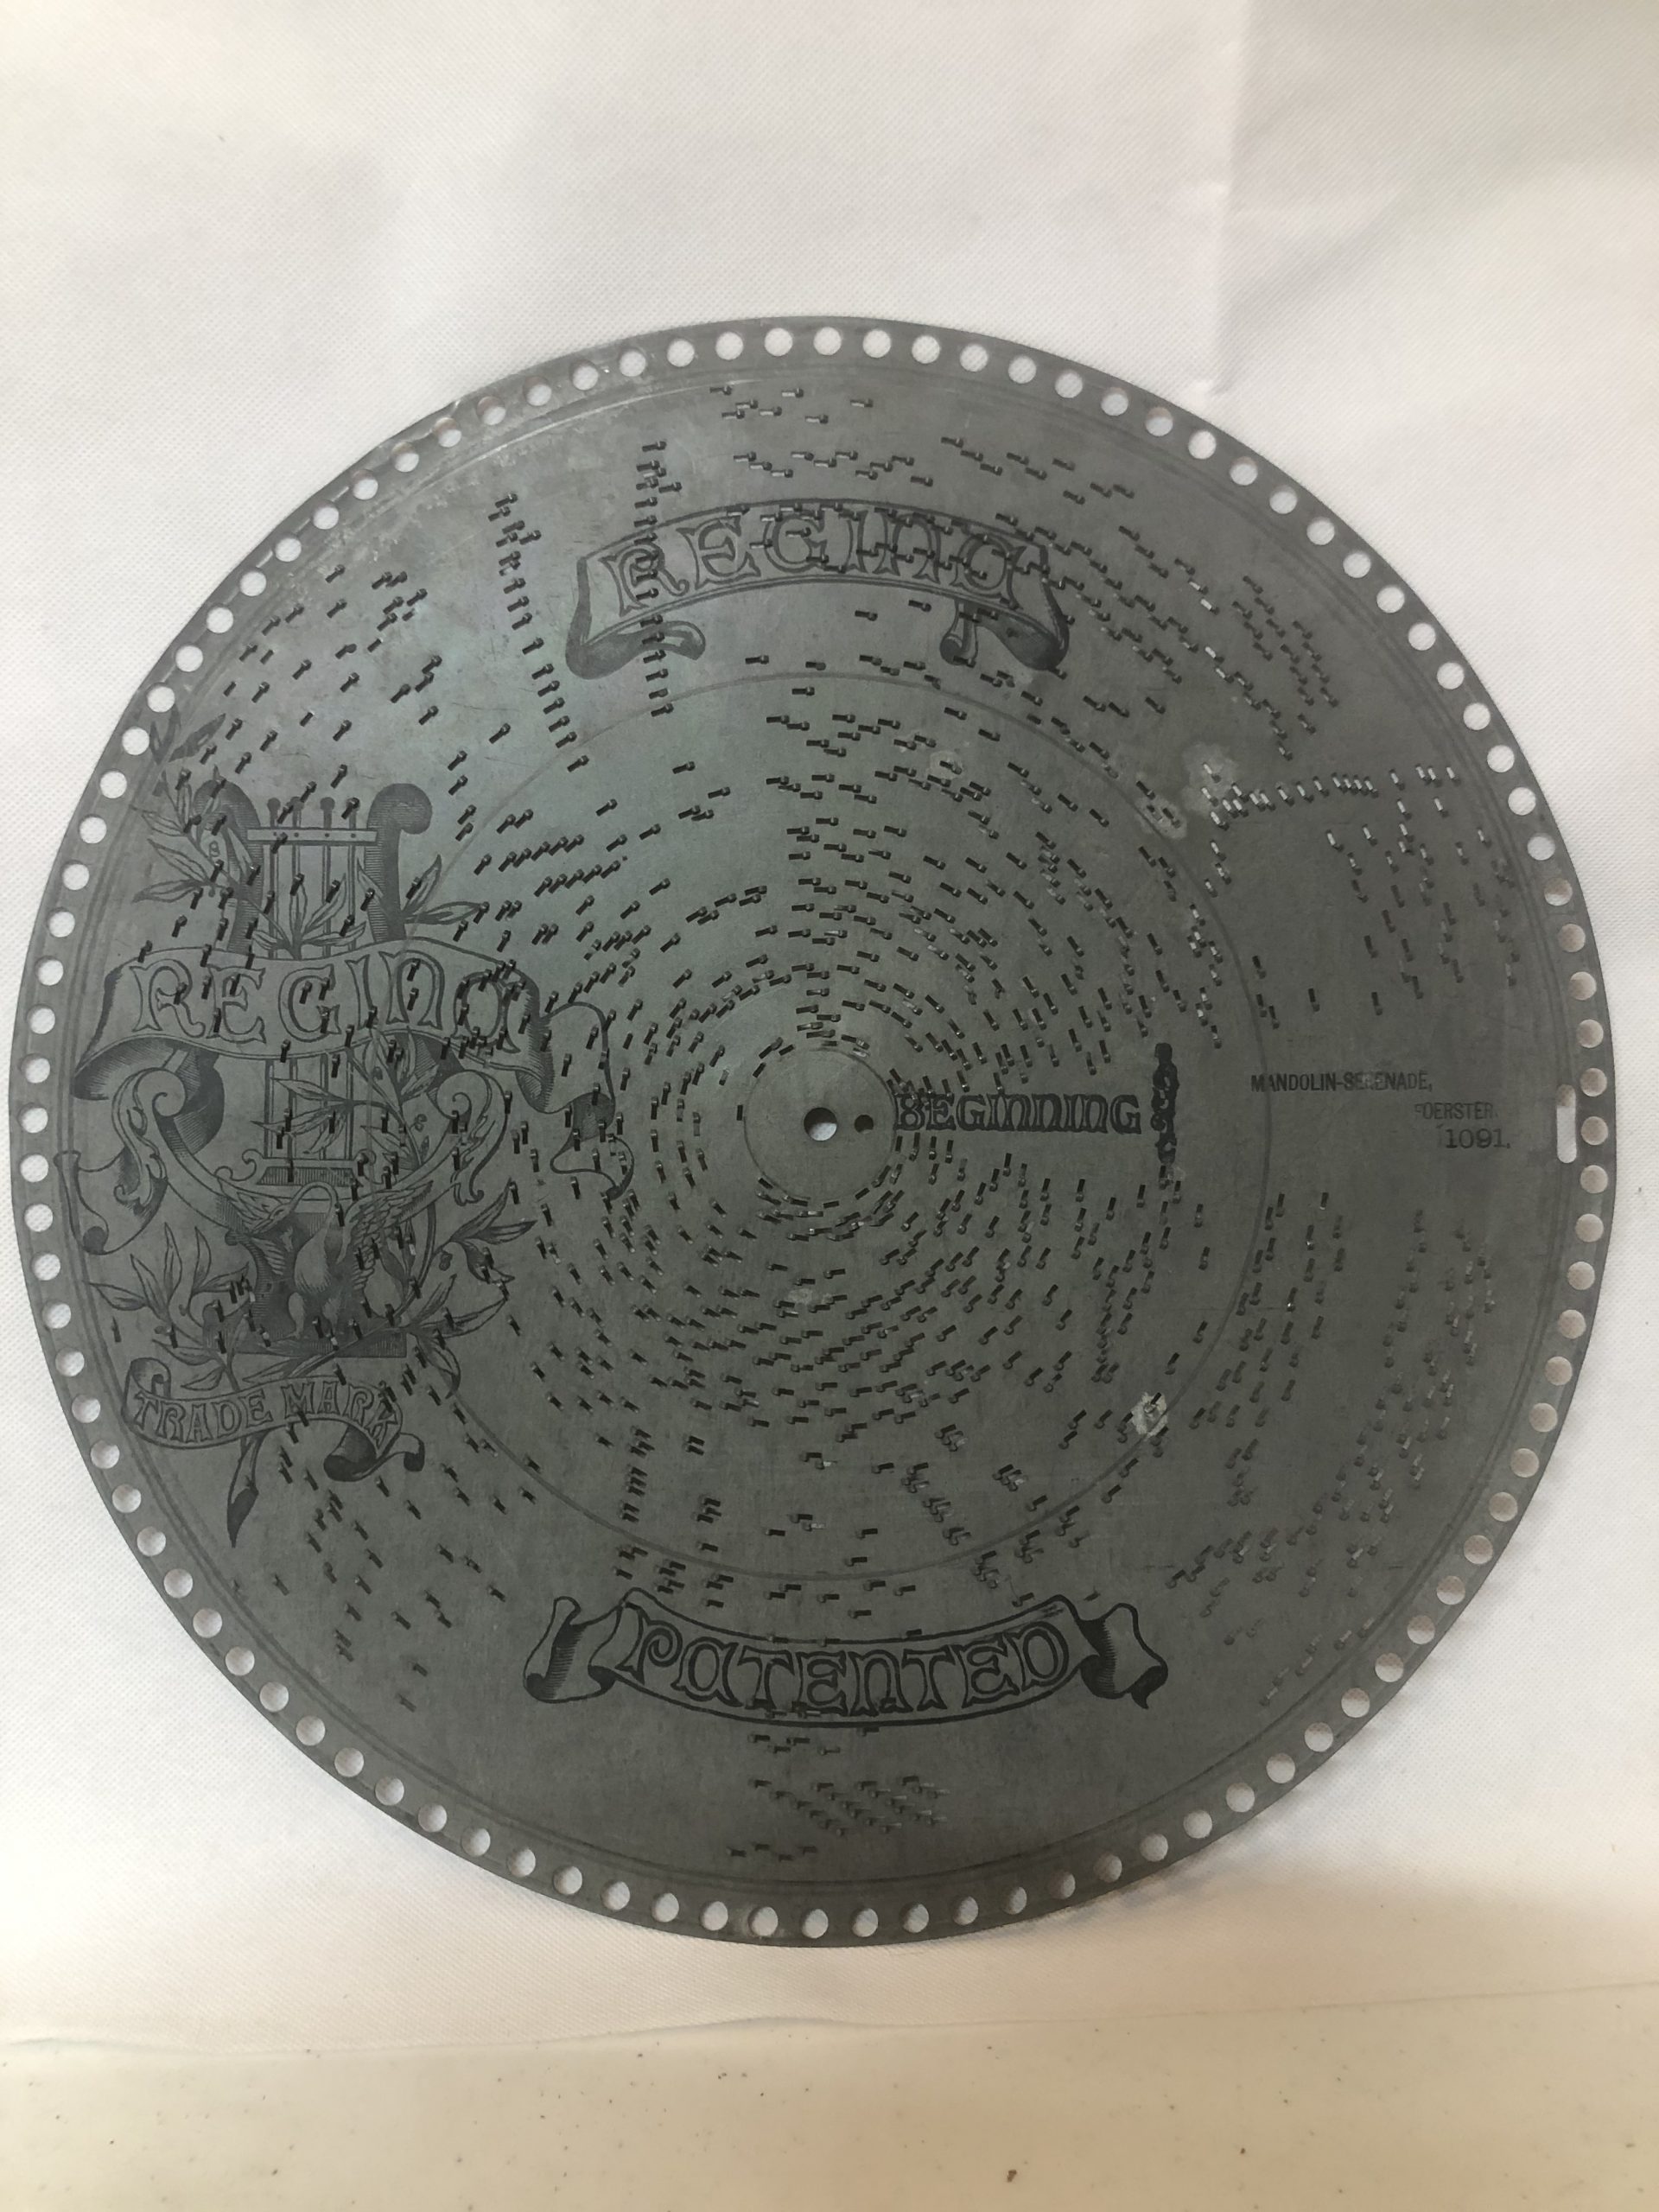 Regina 15.5-inch Music Box Disc… “Hot Time in the Old Town”